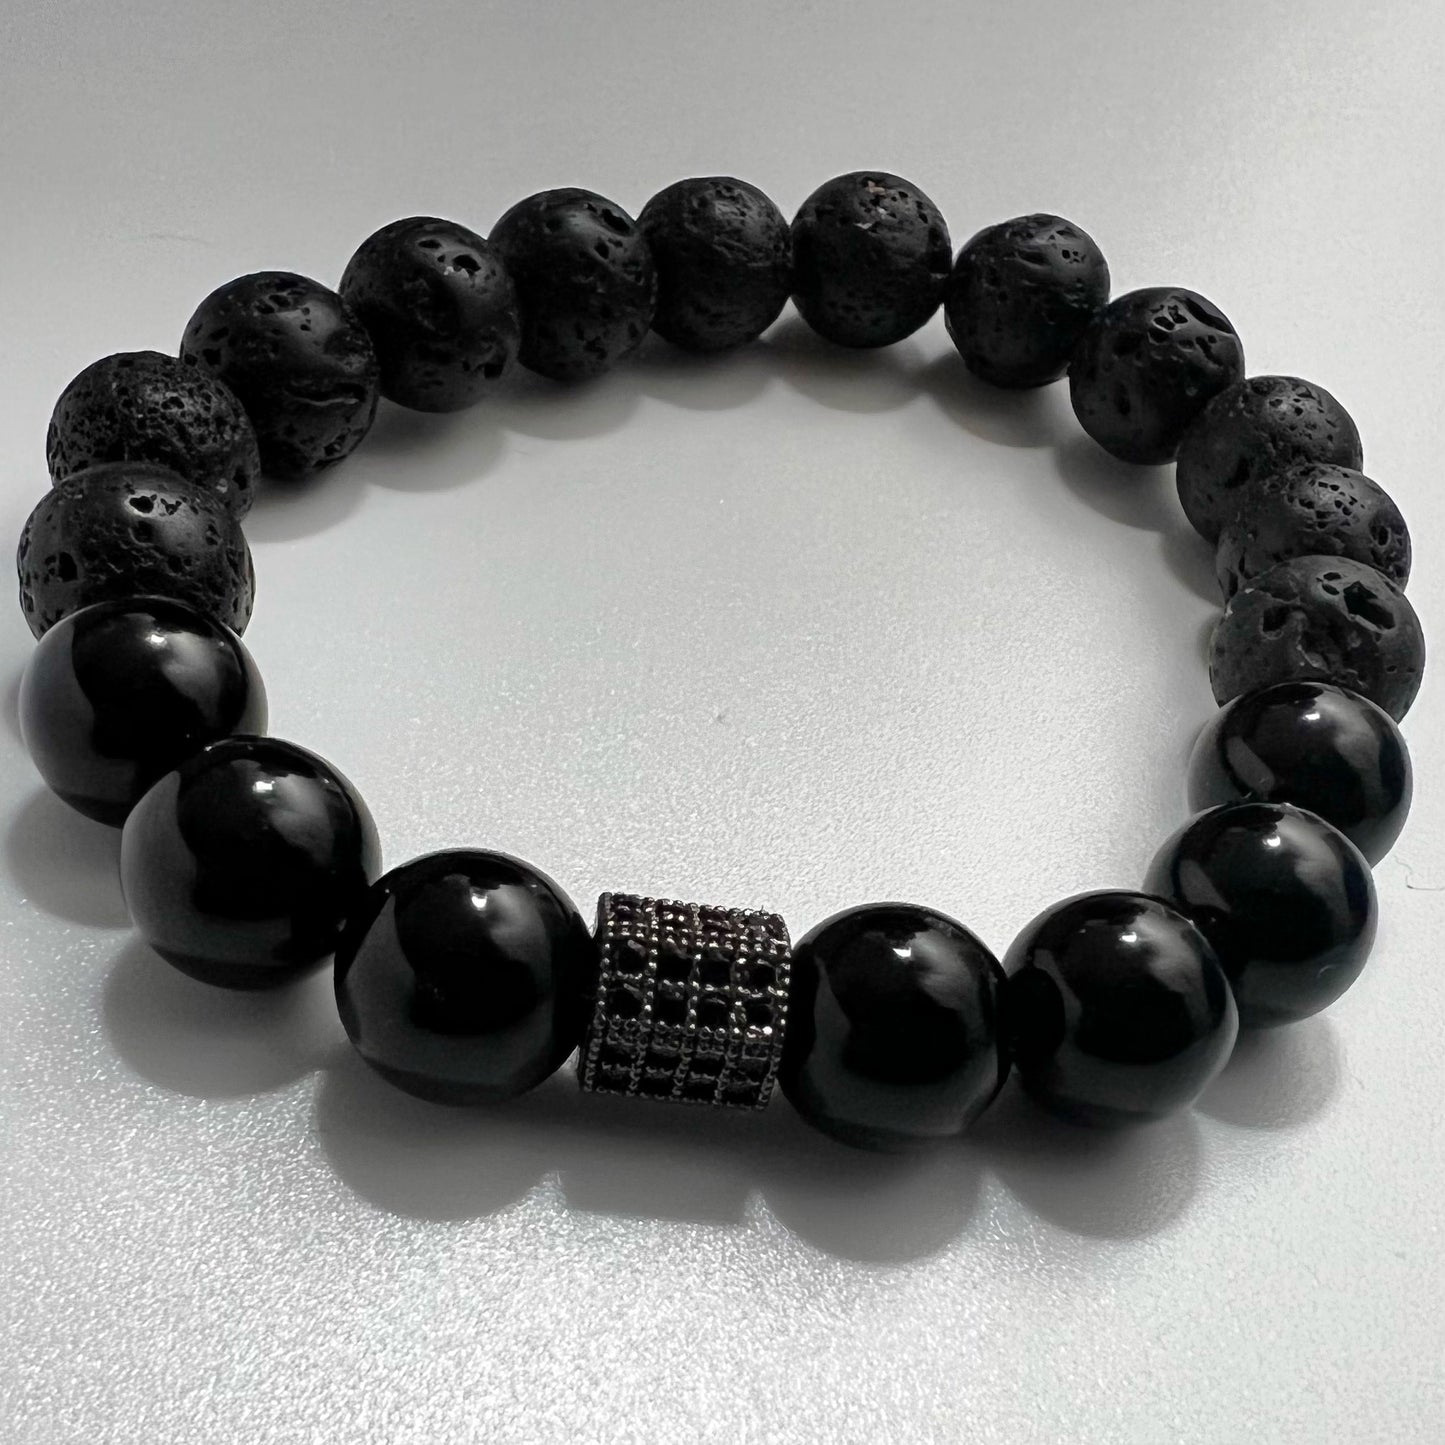 Lava: grounding and calming.stabilizes the root chakra/ onyx: increase regeneration, happiness, intuition, instincts bracelet 18cm Stretch bracelet